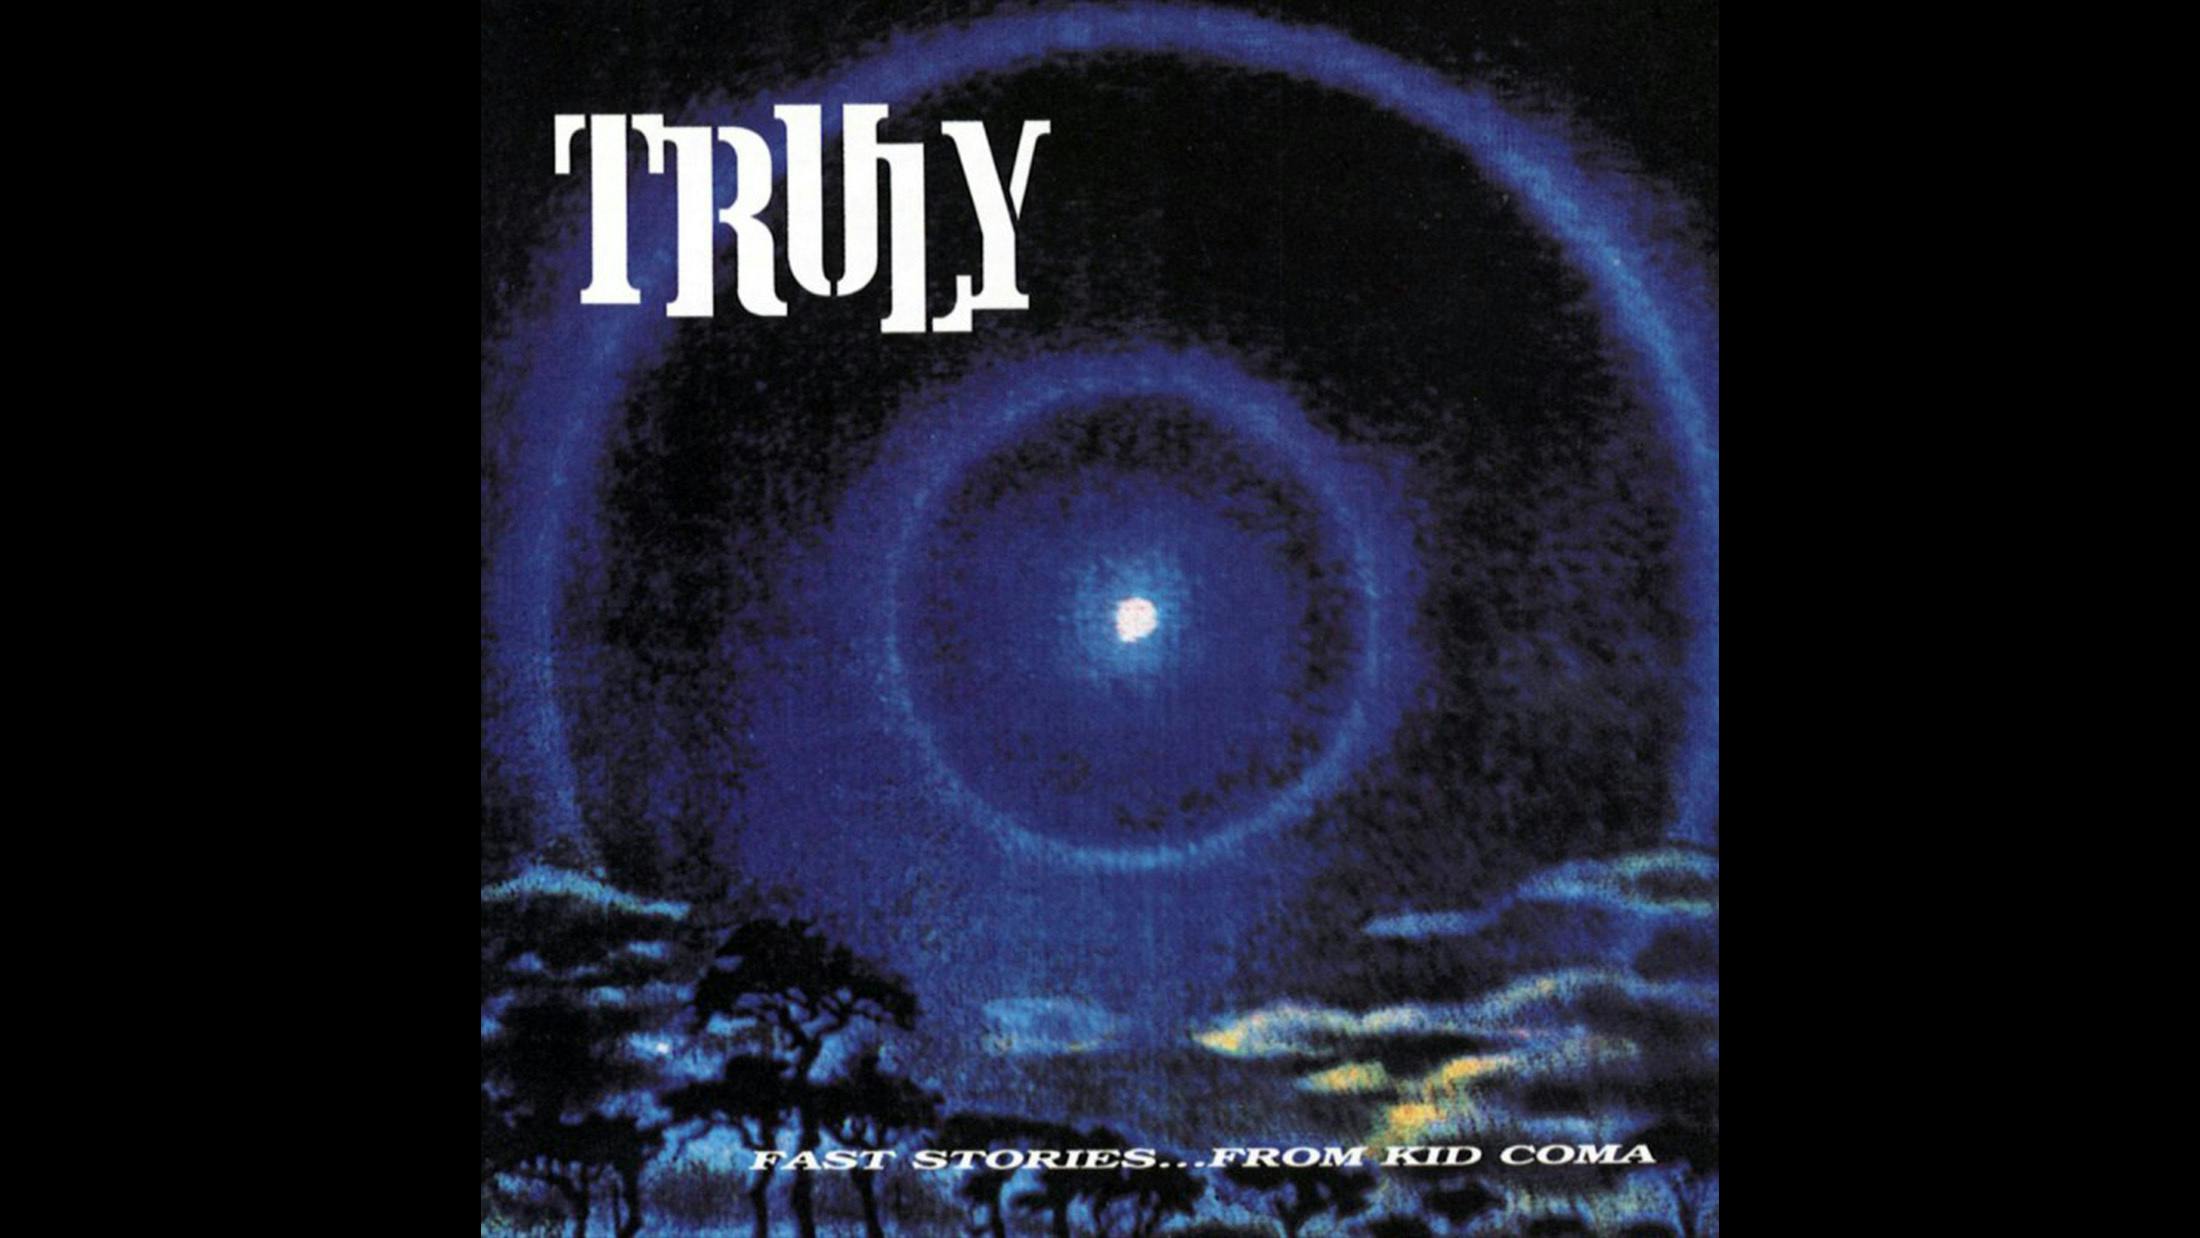 To say that great things were expected of Truly is something of an understatement. The trio of frontman Robert Roth, bassist Hiro Yamamoto (ex-Soundgarden) and drummer Mark Pickerel (ex-Screaming Trees) had already released a remarkable EP on Sub Pop when they were signed by Capitol Records. This absorbing, psych-kissed debut emerged in the summer of ’95 to a full five-K fanfare in Kerrang!. And then… well, very little. The label’s lack of interest was evident. Grunge, they were told, was dead. And yet today, Fast Stories… From Kid Coma remains a genuinely vital album, and quite possibly the genre’s swan song.